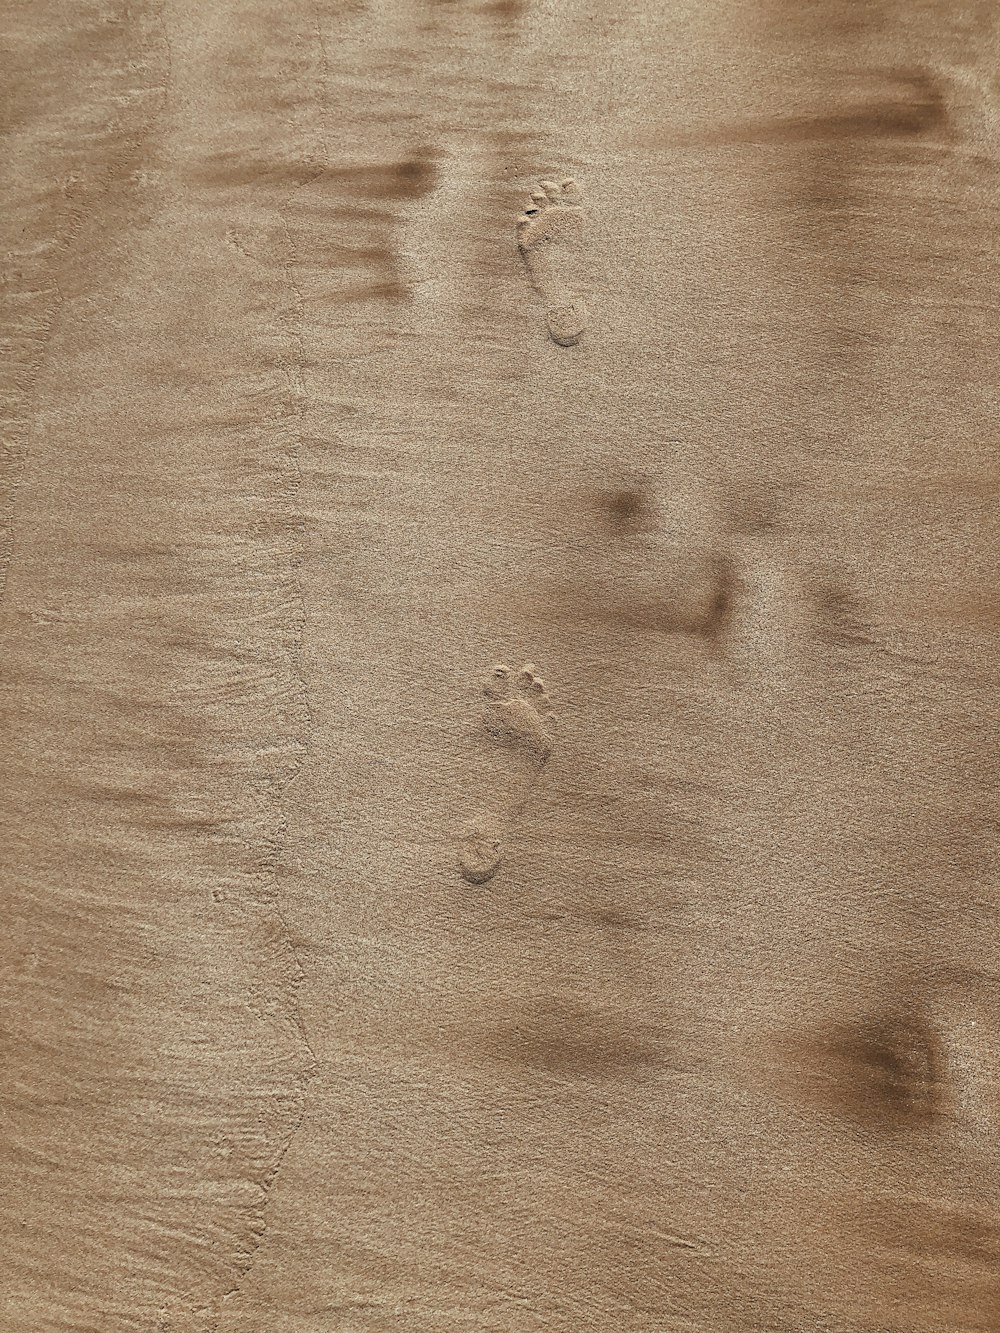 a close up of a piece of wood with footprints on it